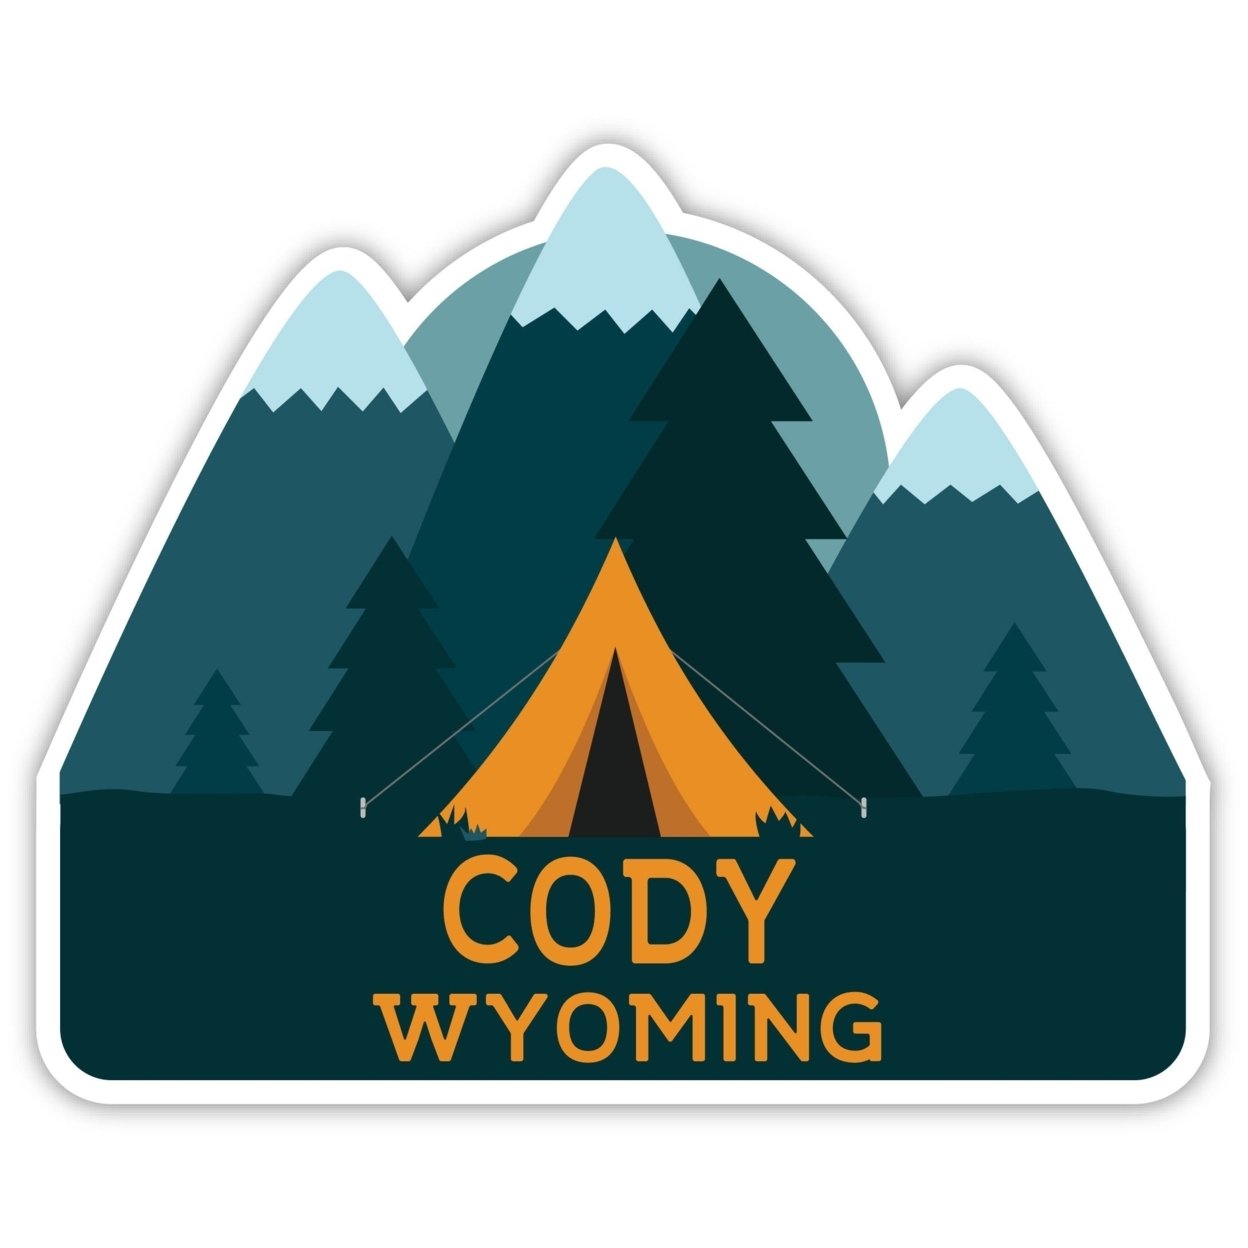 Cody Wyoming Souvenir Decorative Stickers (Choose Theme And Size) - Single Unit, 6-Inch, Adventures Awaits